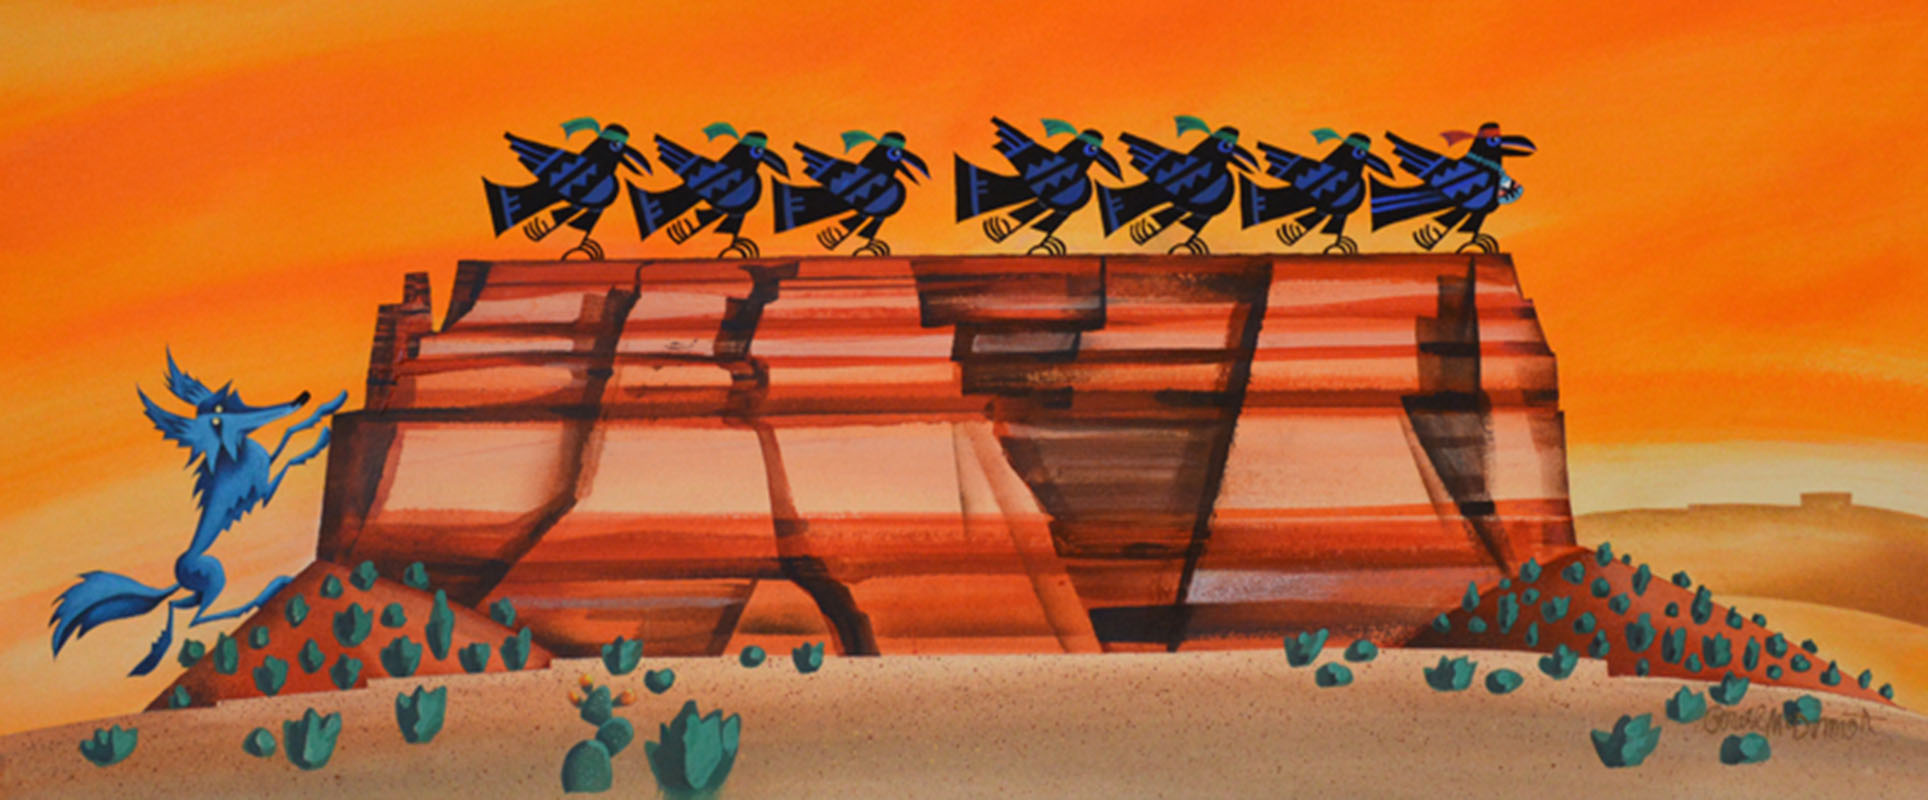 A Flock of Crows